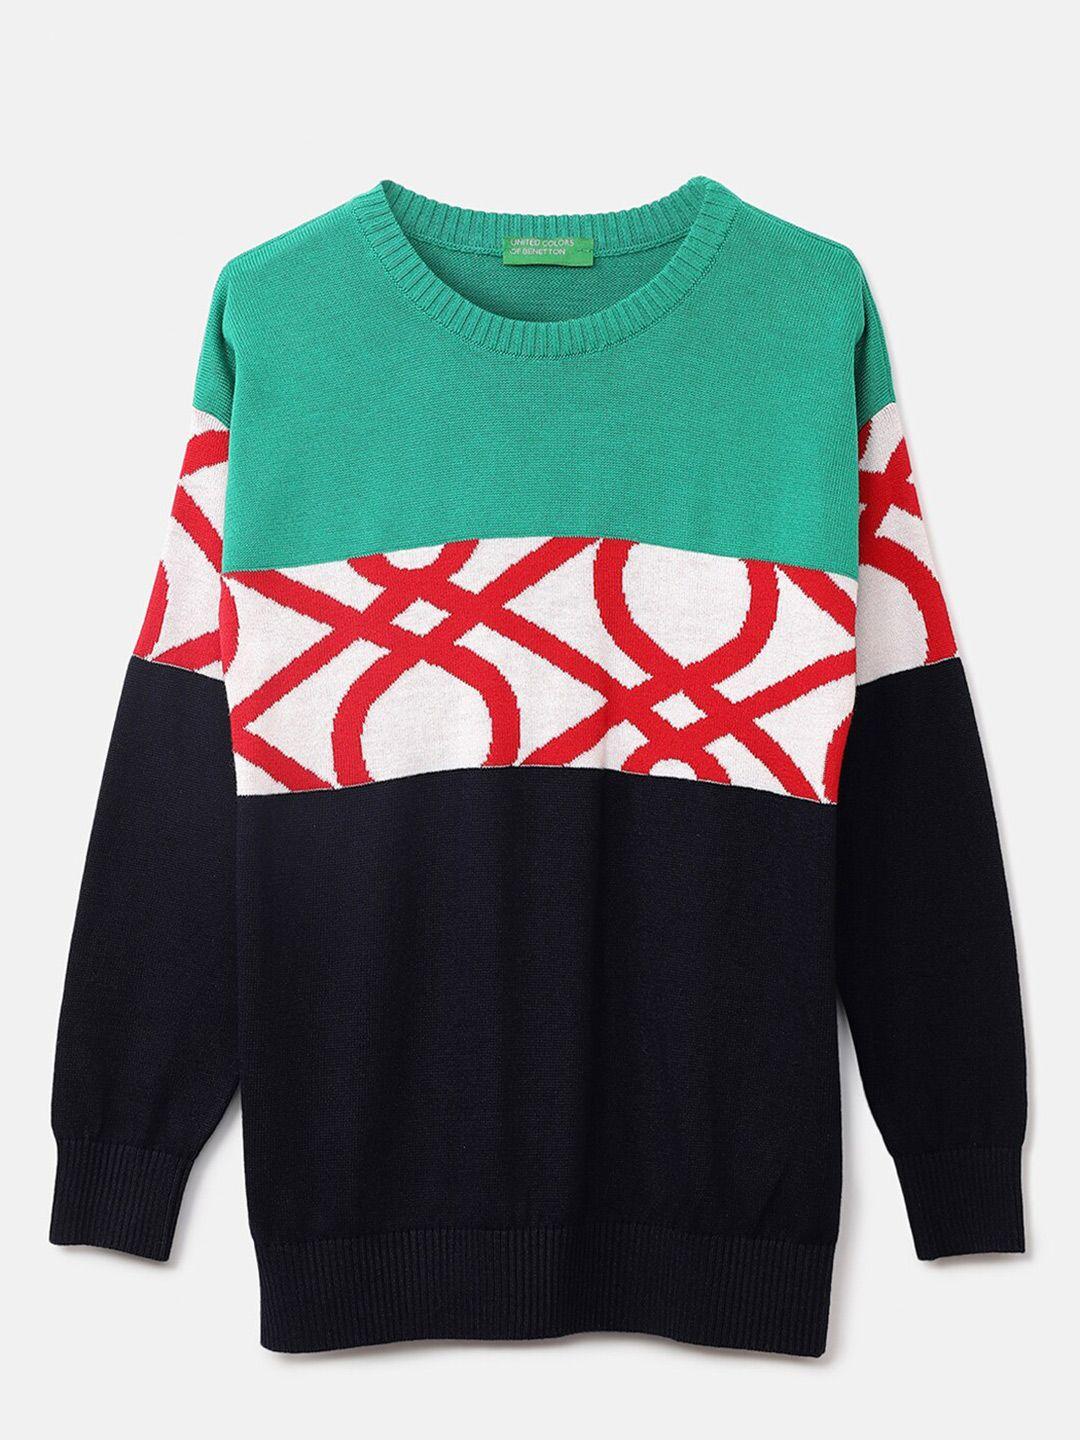 united-colors-of-benetton-boys-green-&-white-colourblocked-printed-pullover